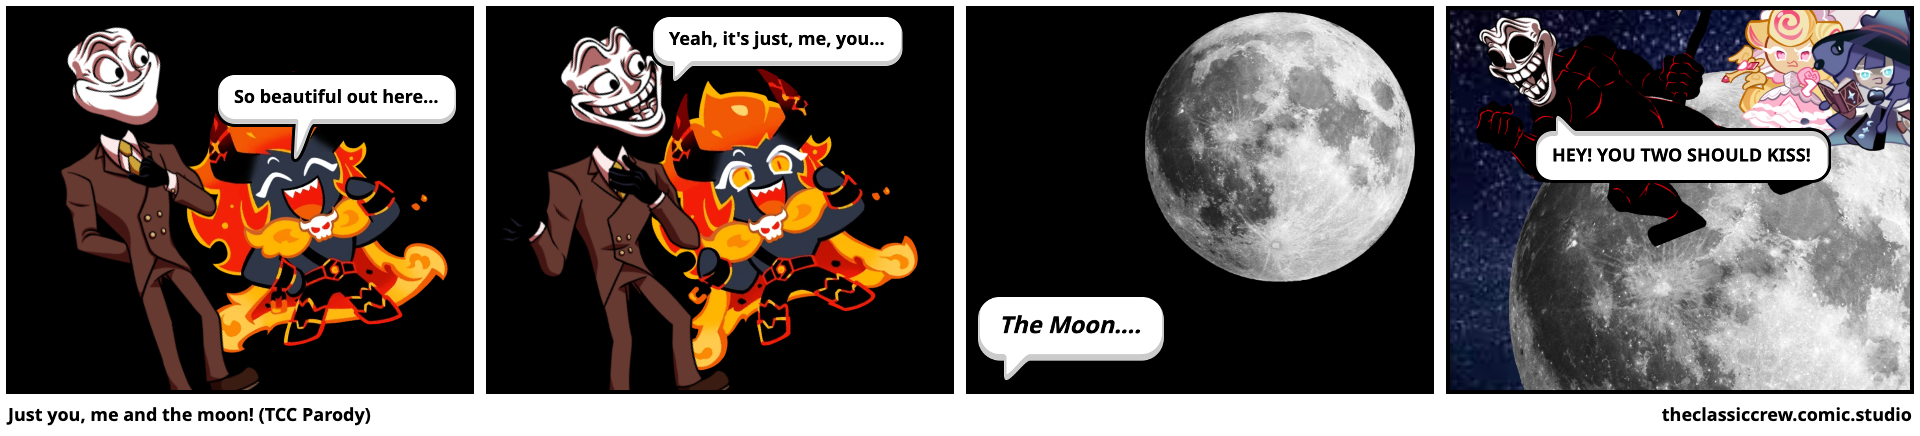 Just you, me and the moon! (TCC Parody)